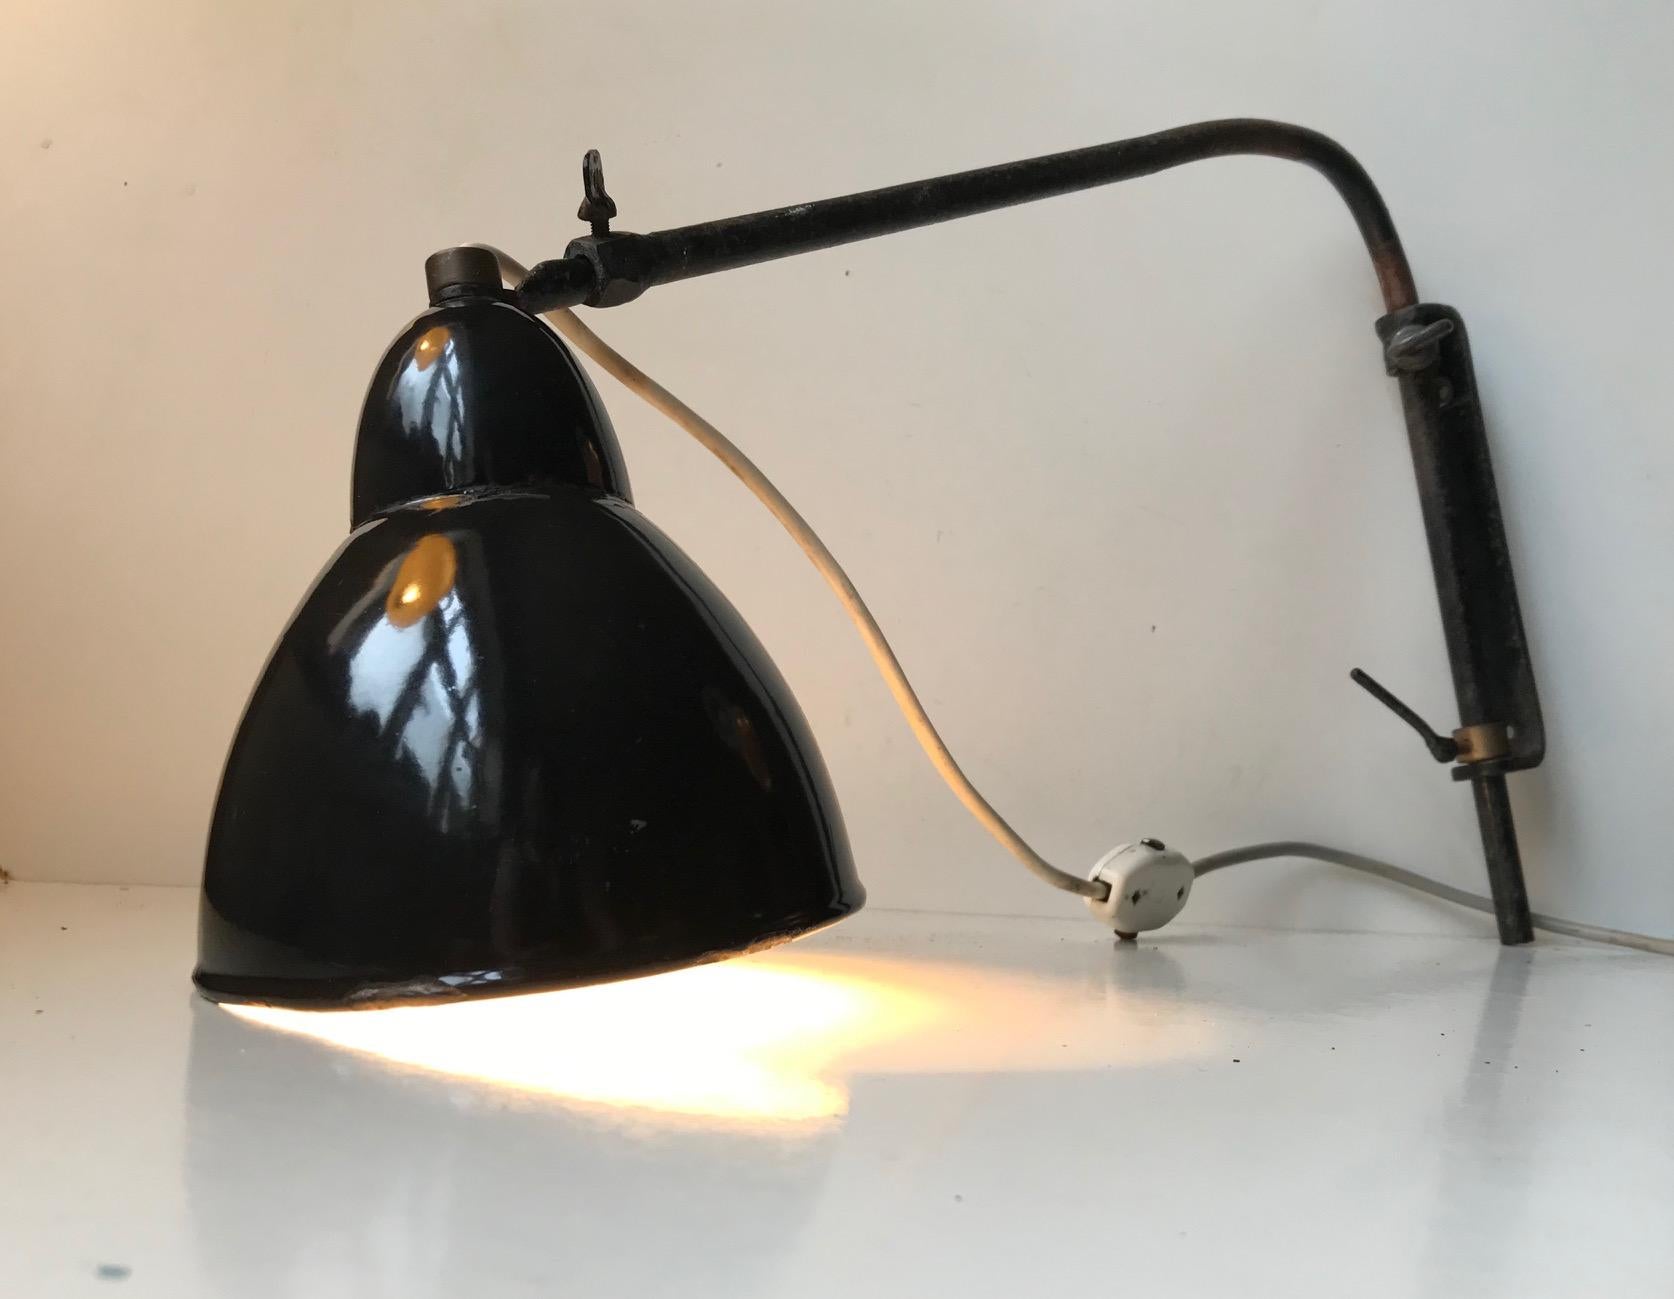 Extendable wall light with side-side, swing arm, adjustable mounts. This light has an Industrial provenance an it came out of a metal workshop in Leipzig Germany where it had been hanging since the 1930s. It has a reach/dept that are adjustable up